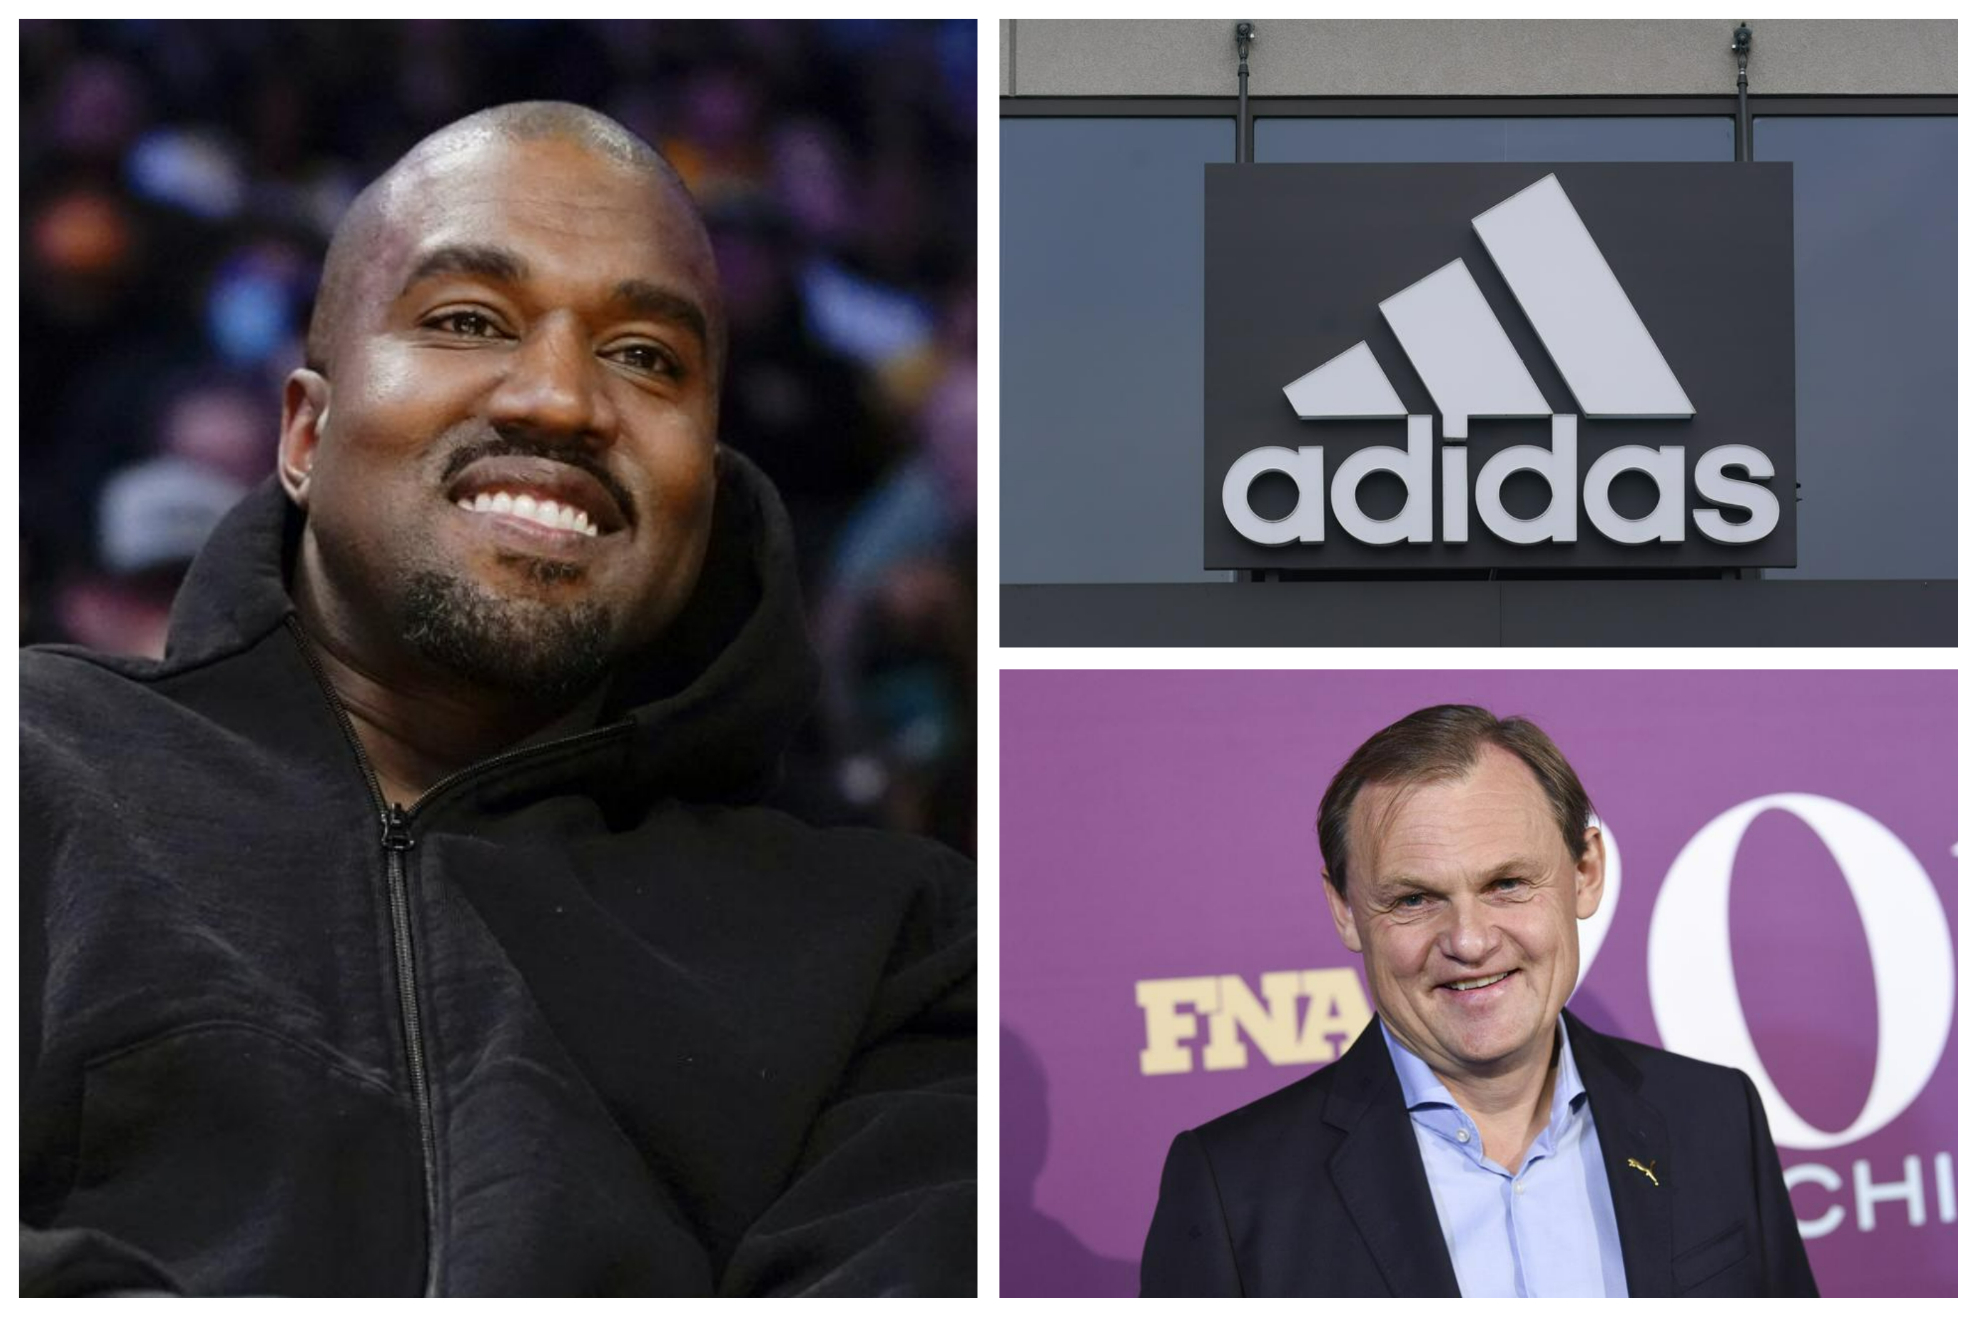 Adidas is launching an investigation after reports of Kanye West innapropiate behavior during meetings.